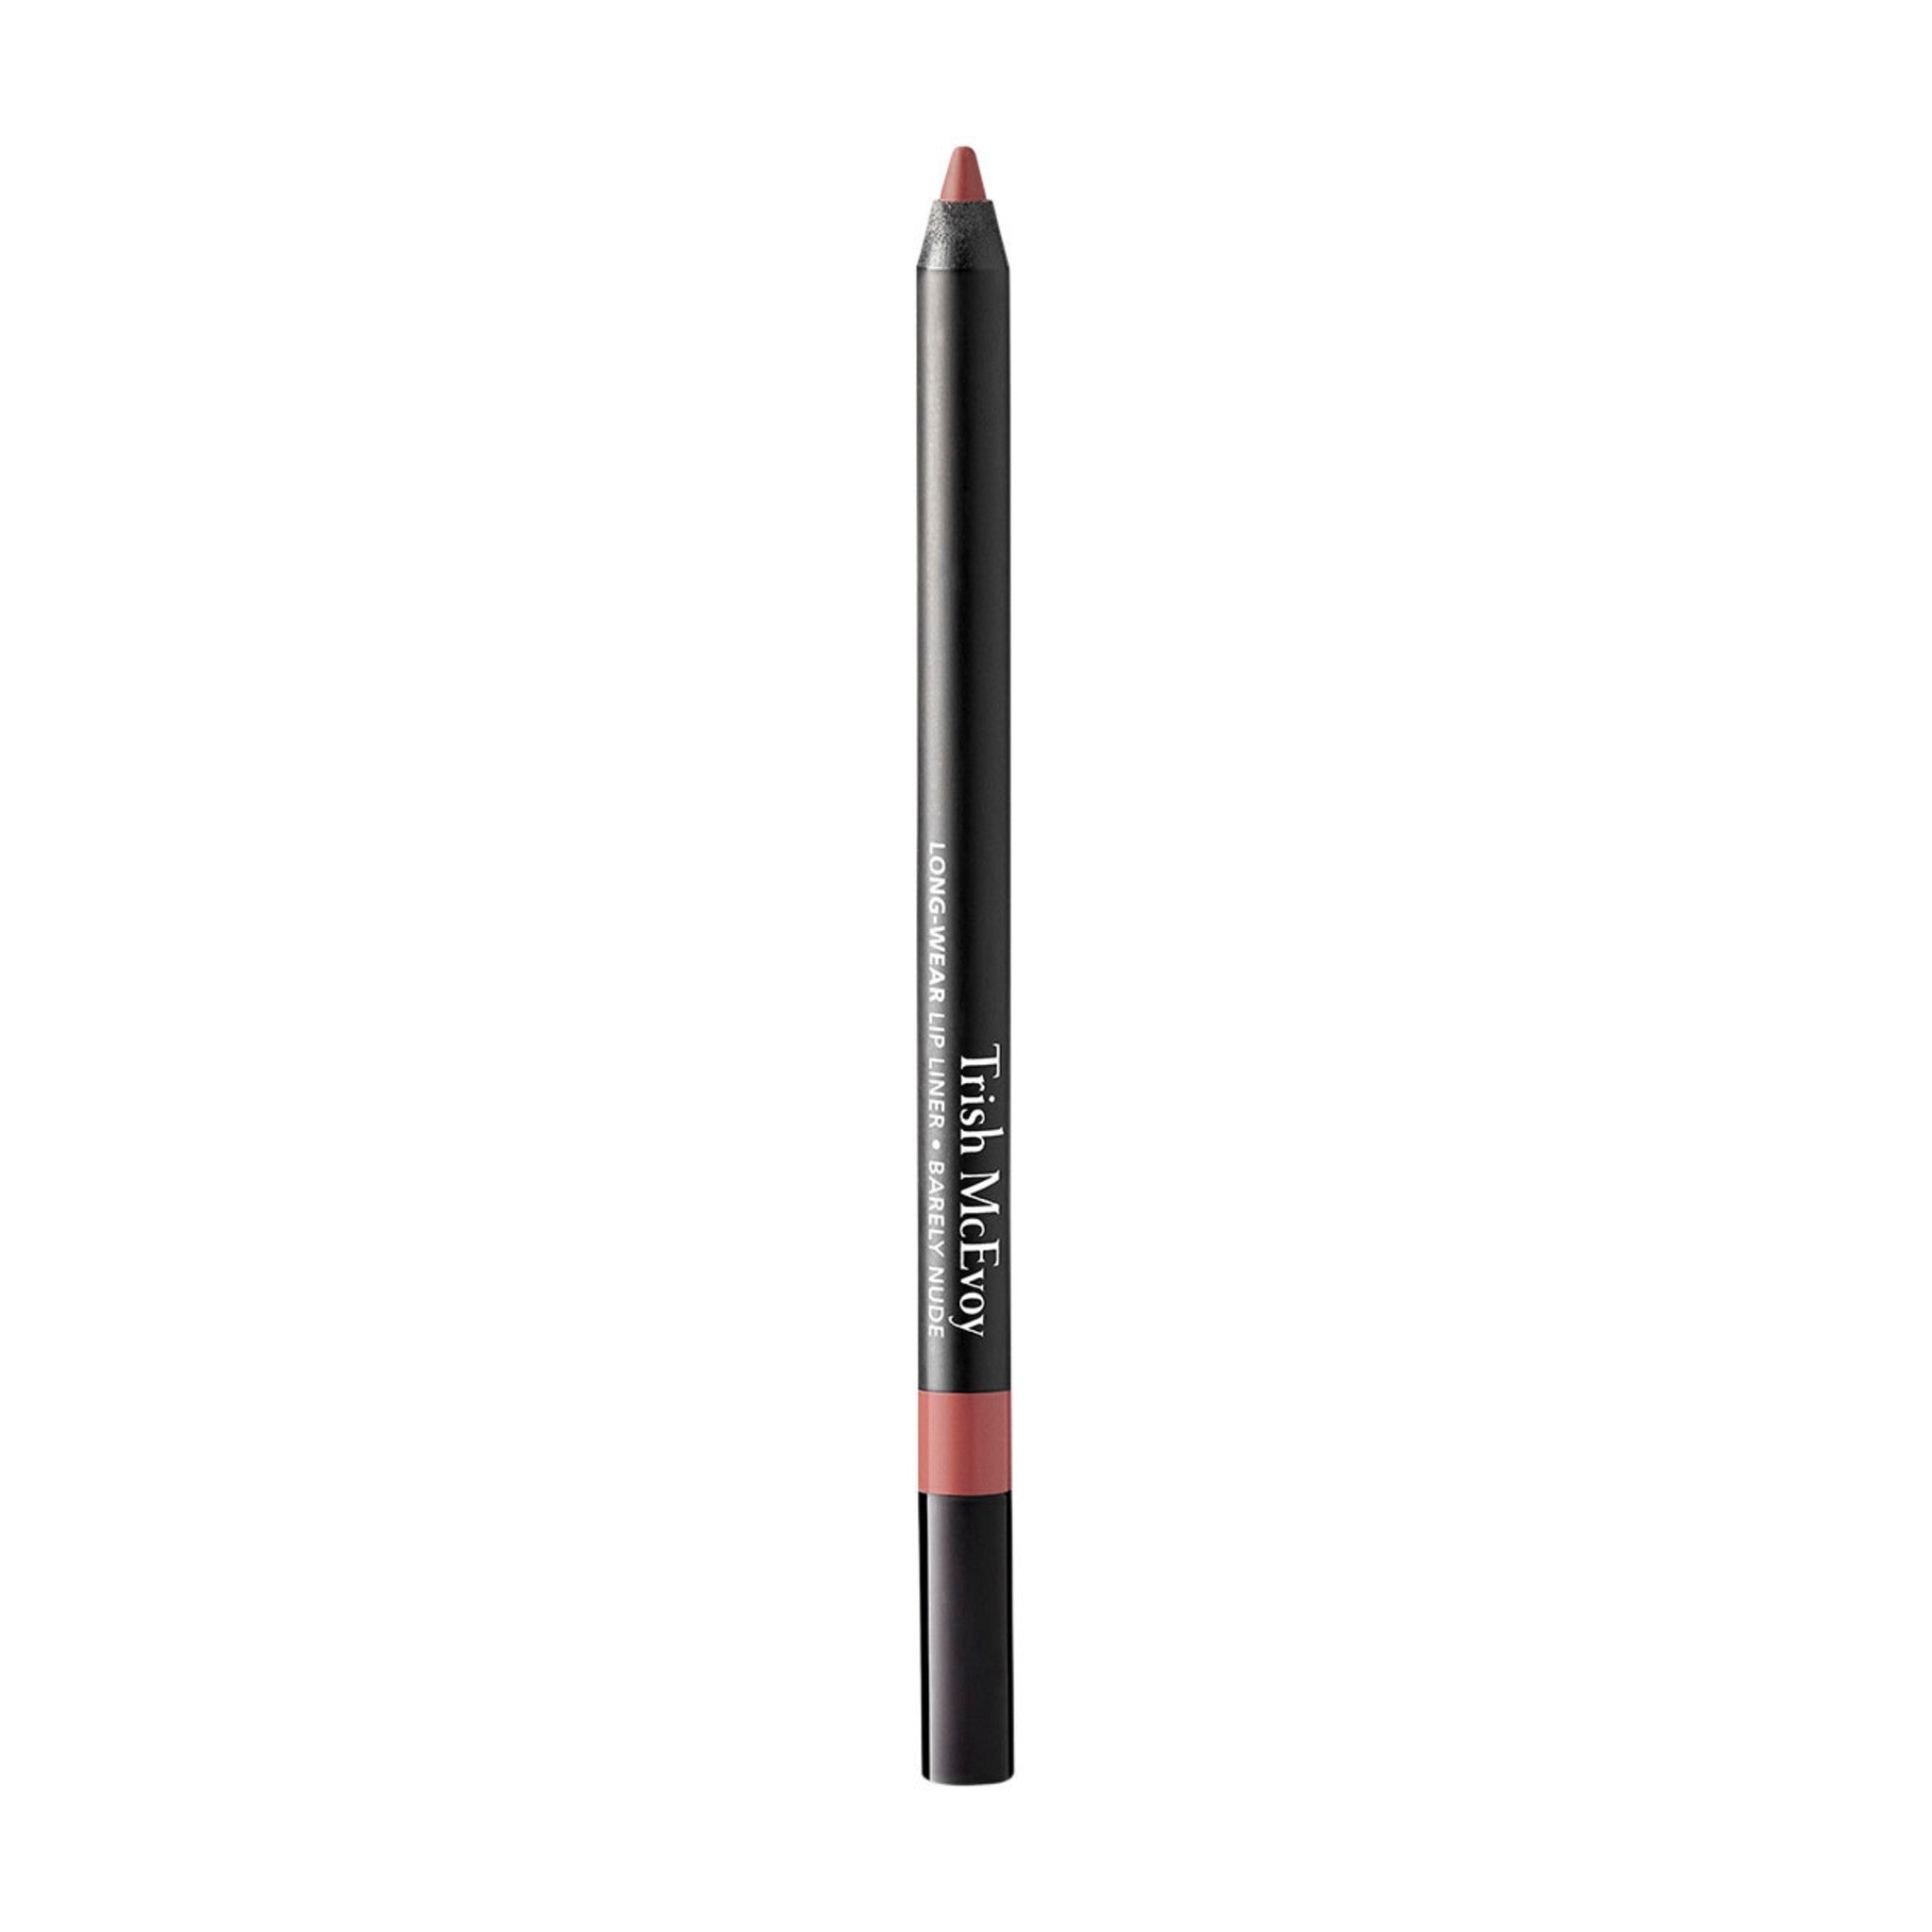 Trish McEvoy Long Wear Lip Liner Color/Shade variant: Barely Nude main image. This product is in the color coral